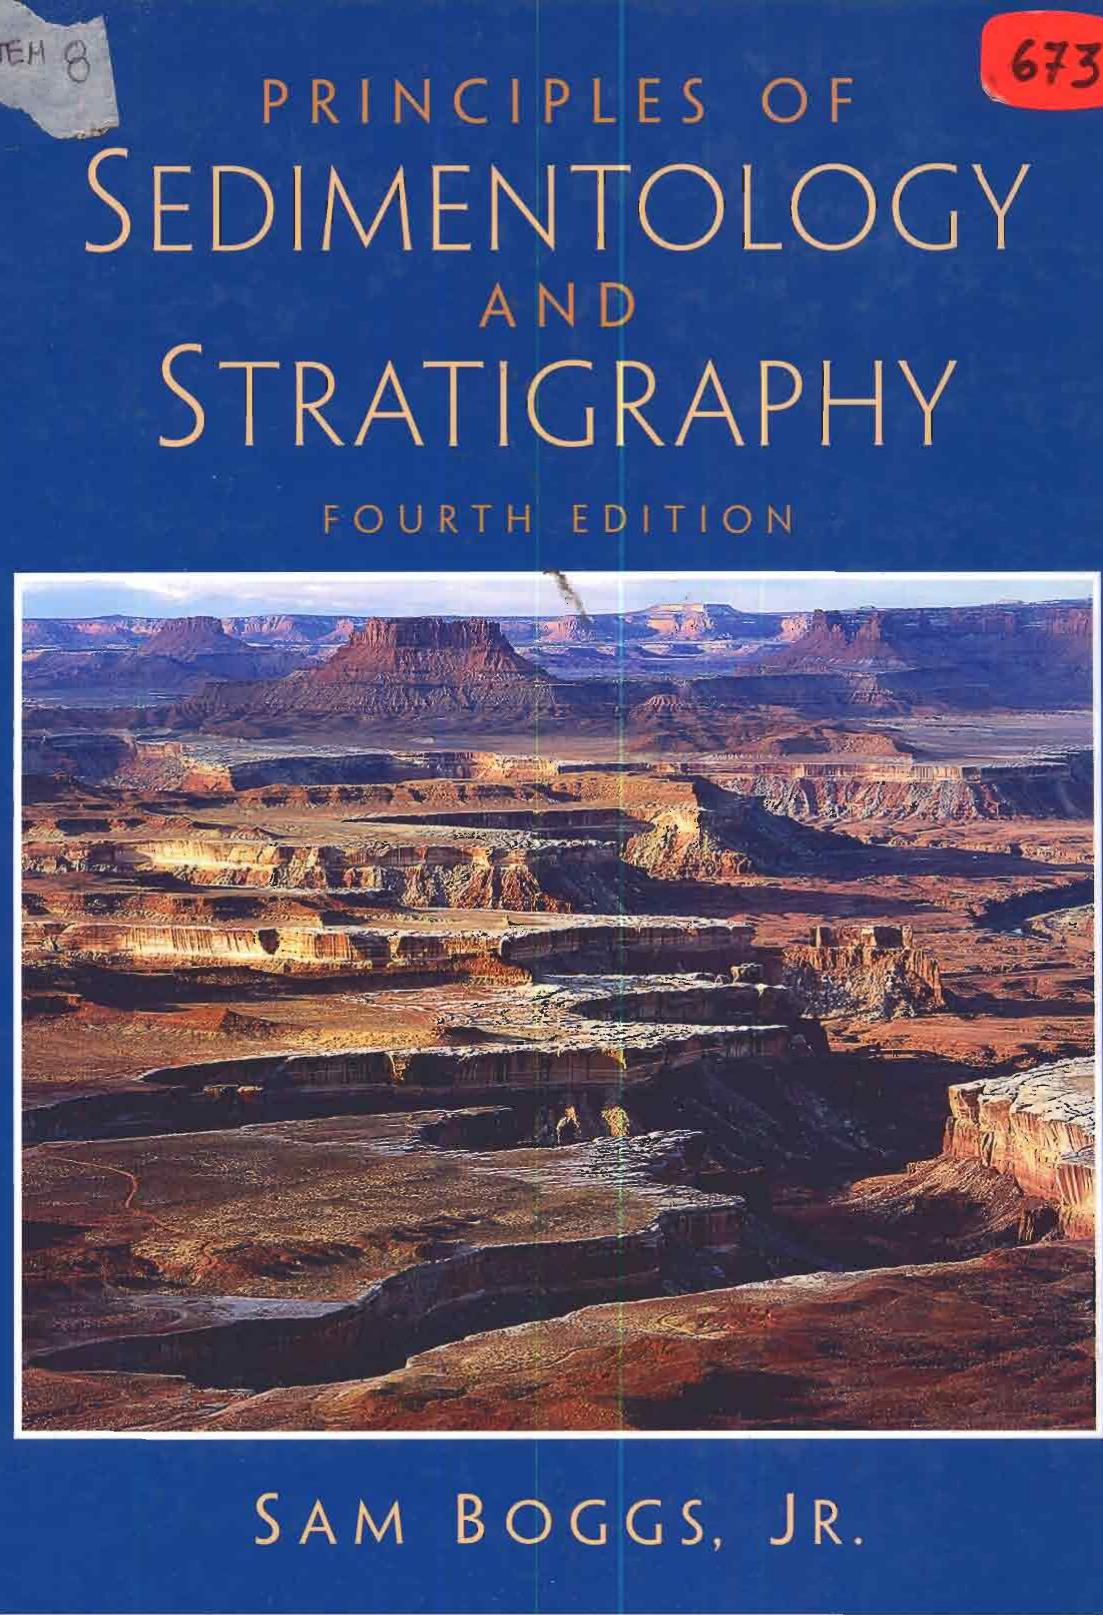 Principles of Sedimentology and Stratigraphy 2011